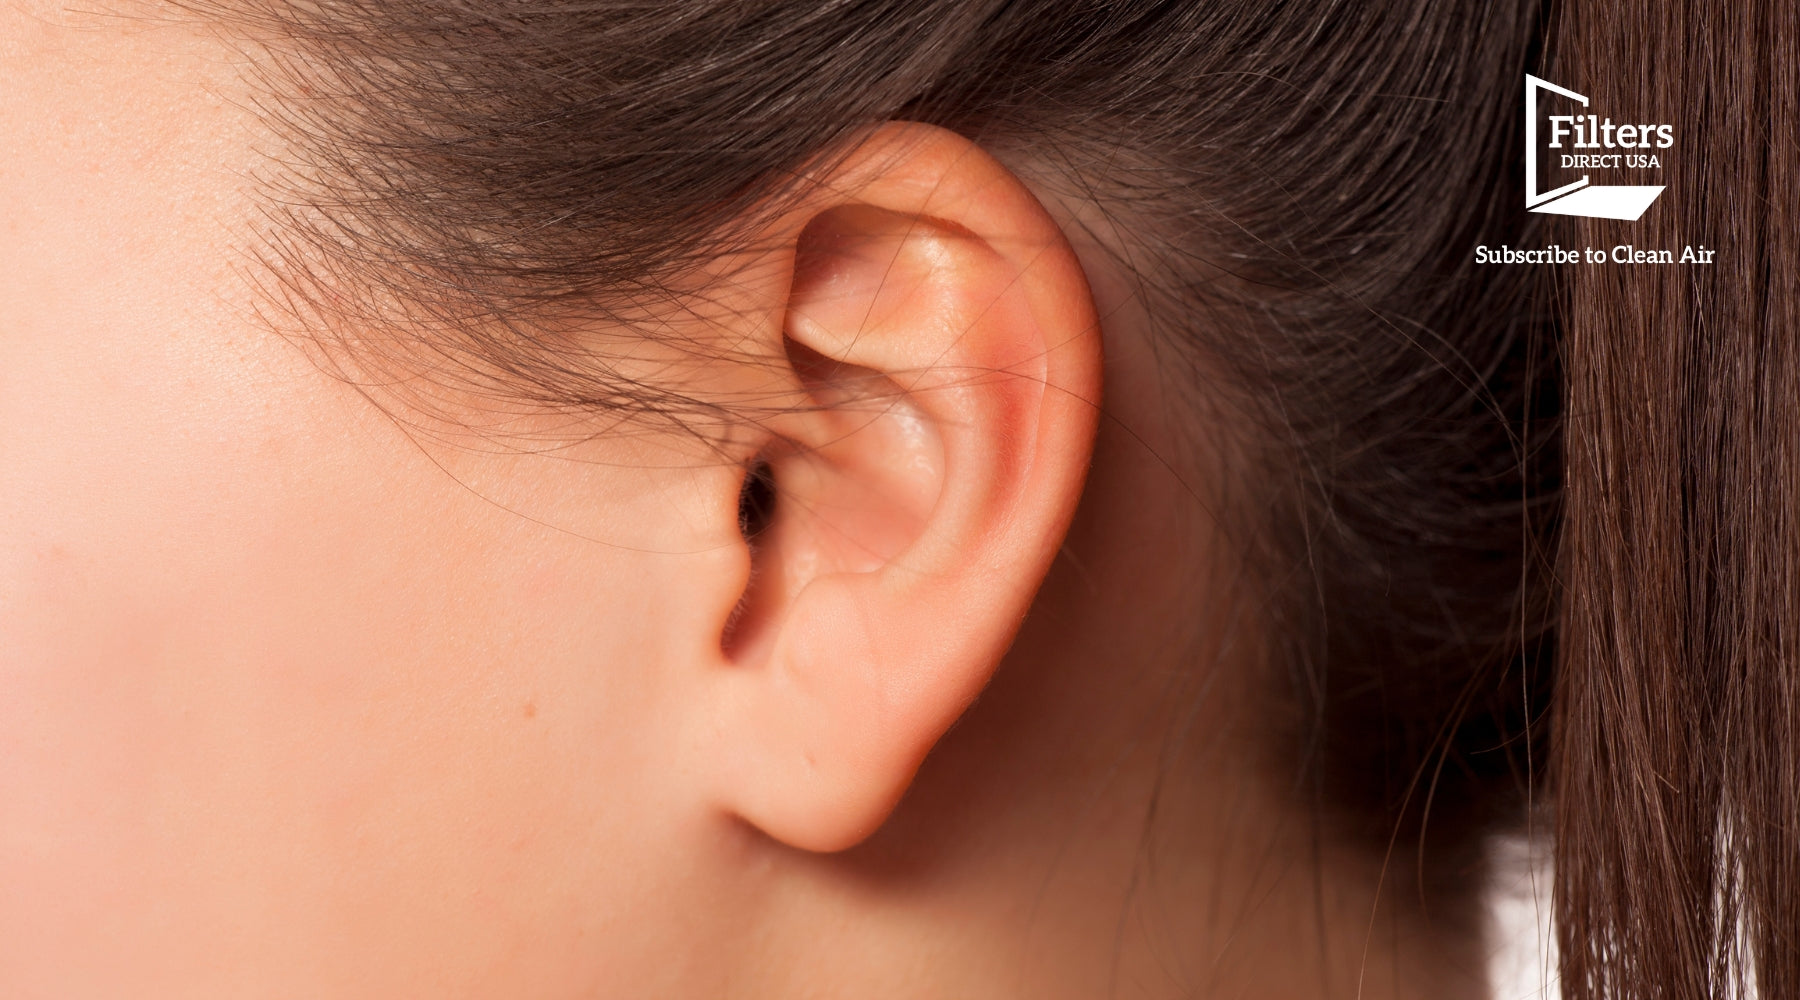 Can allergies cause ear pain?